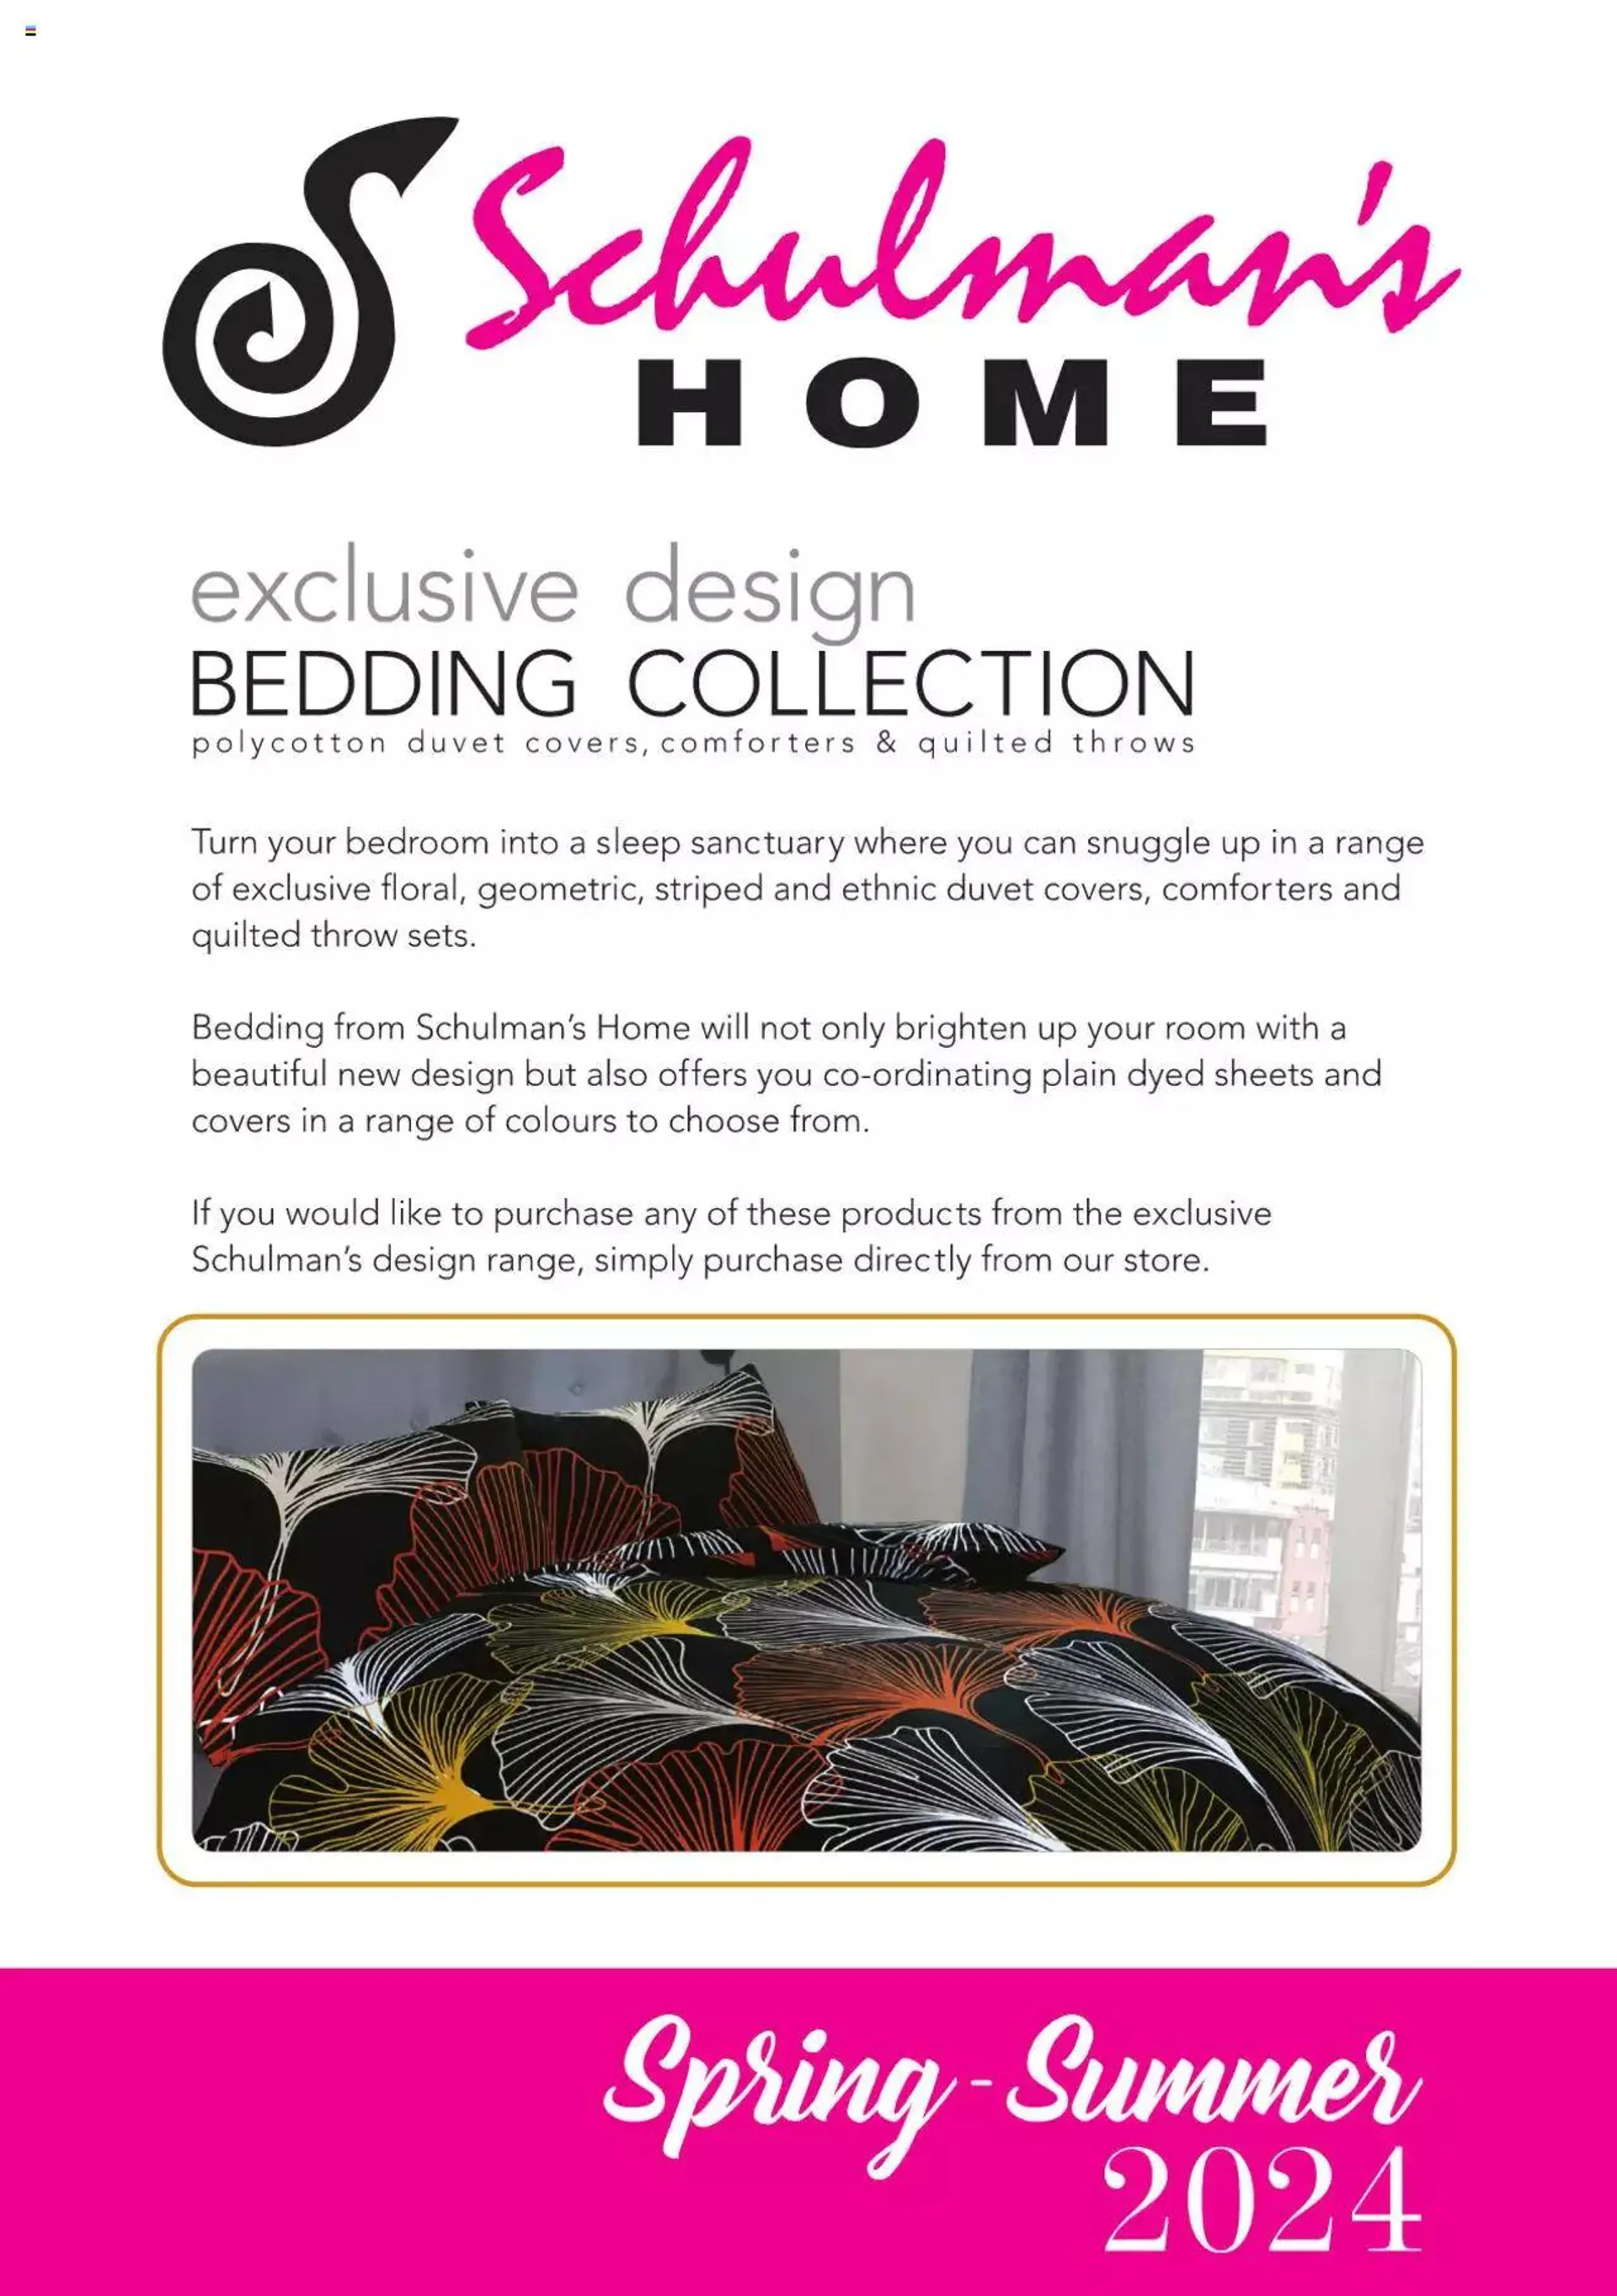 Schulman's Home - Bedding Collection 2024 - 1 January 31 December 2024